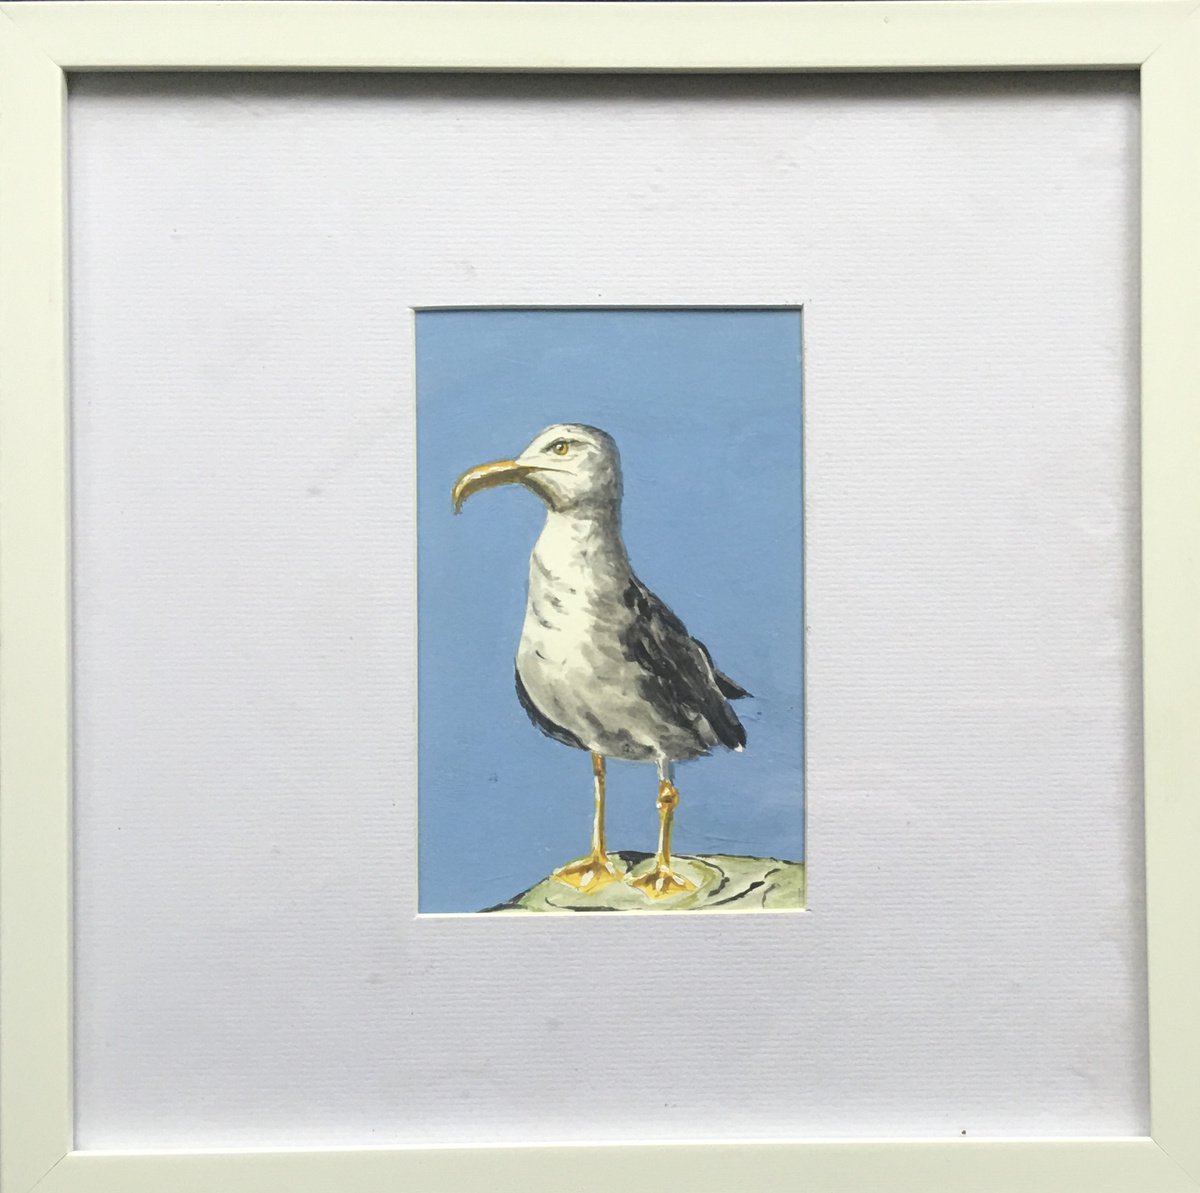 Clifftop Gull #3 by Laurence Wheeler